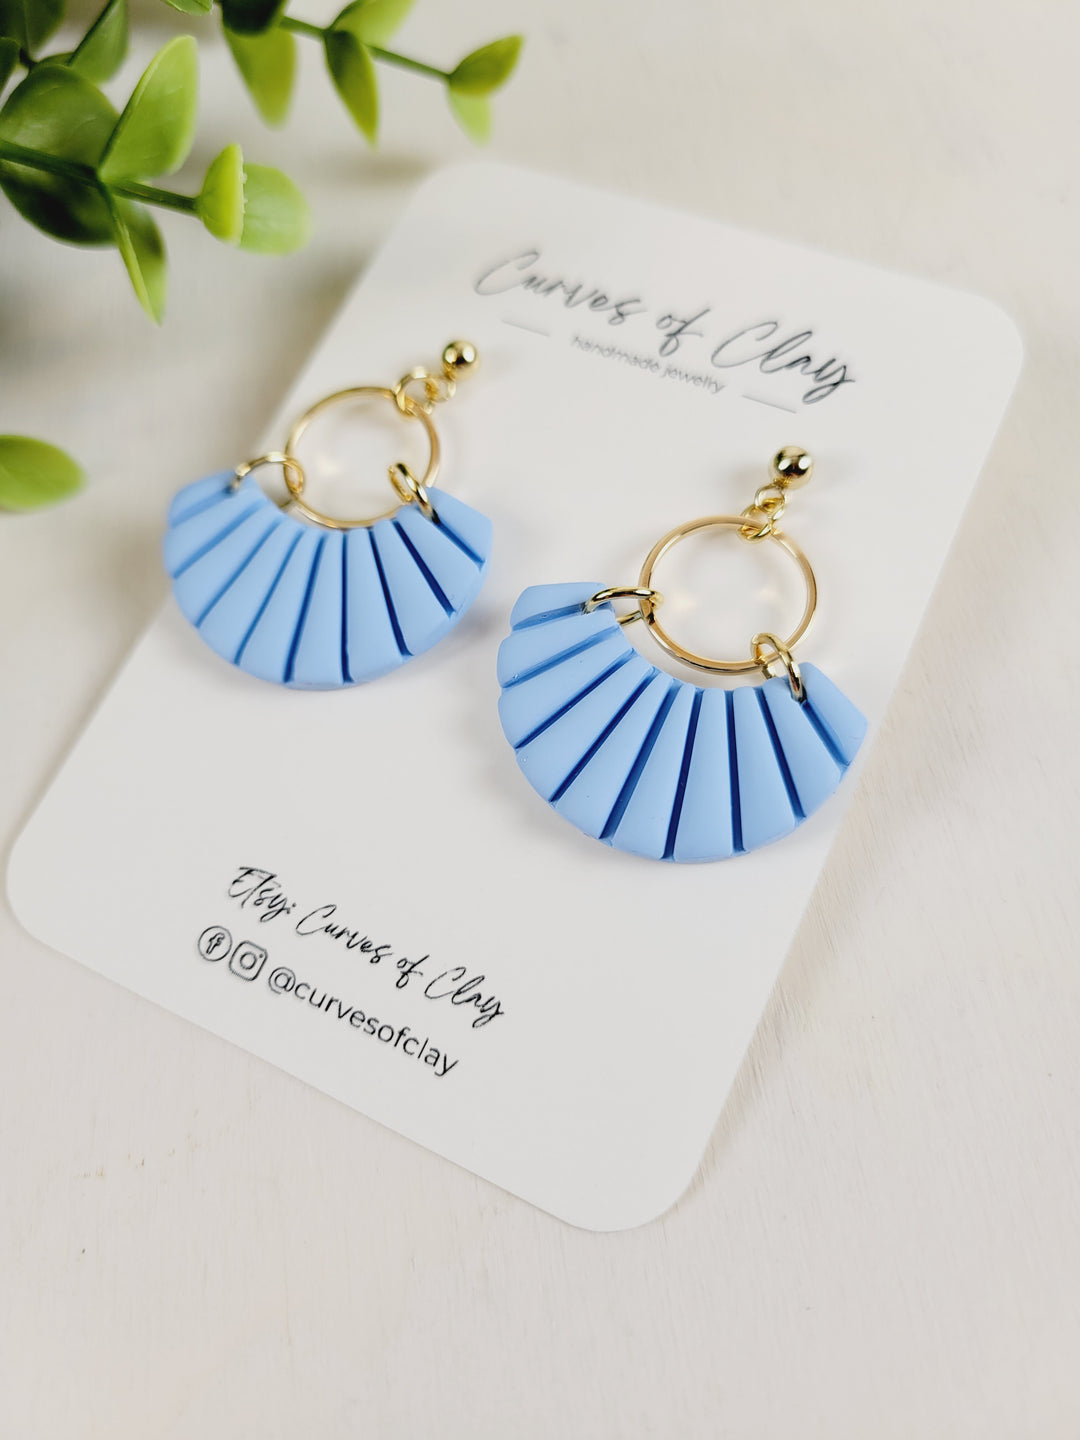 Curves of Clay, Everyday Dangle Earrings